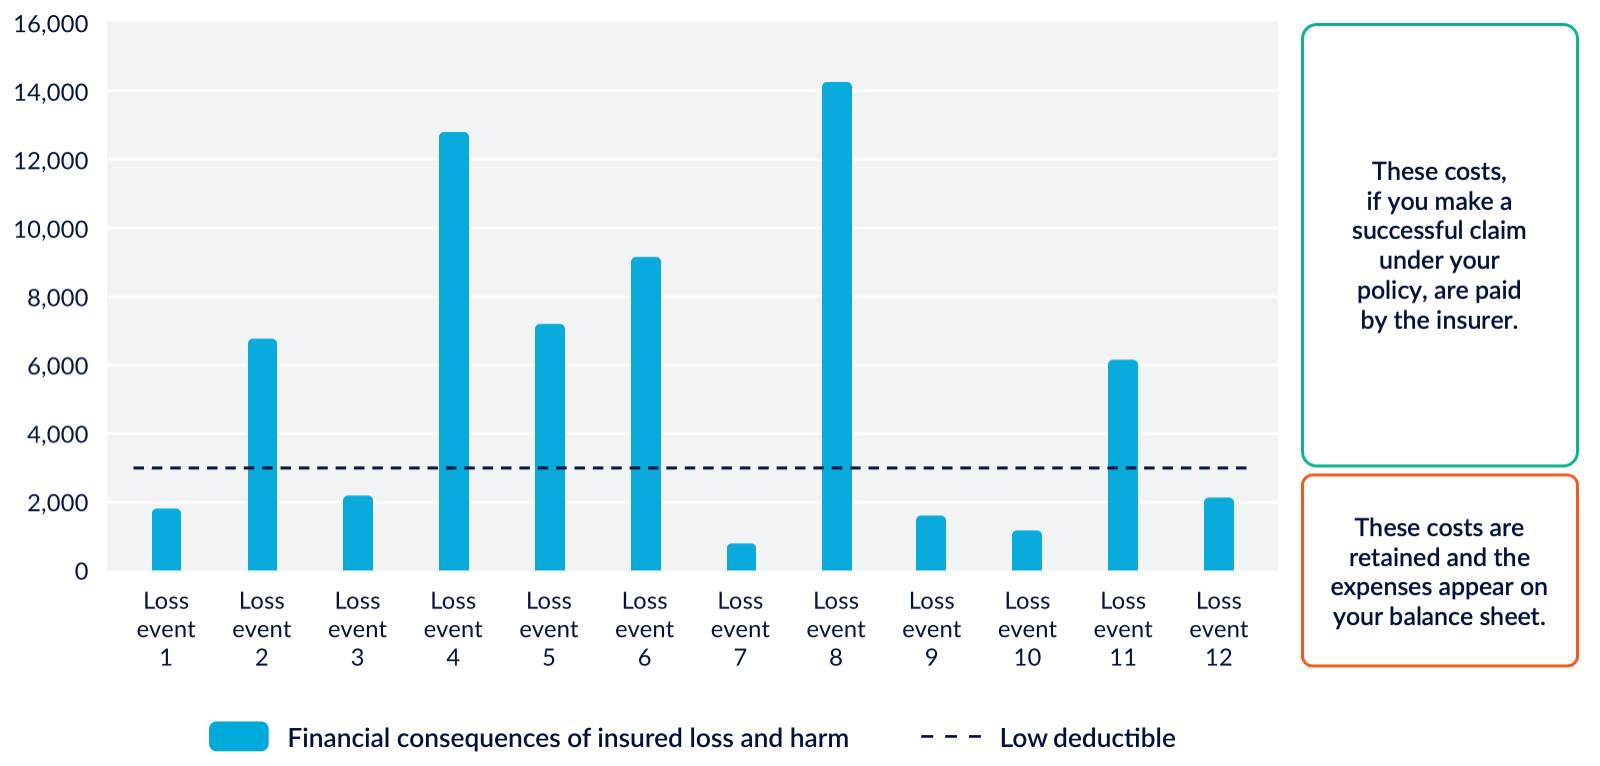 An example of the financial consequences of insured loss and harm and low deductible.  